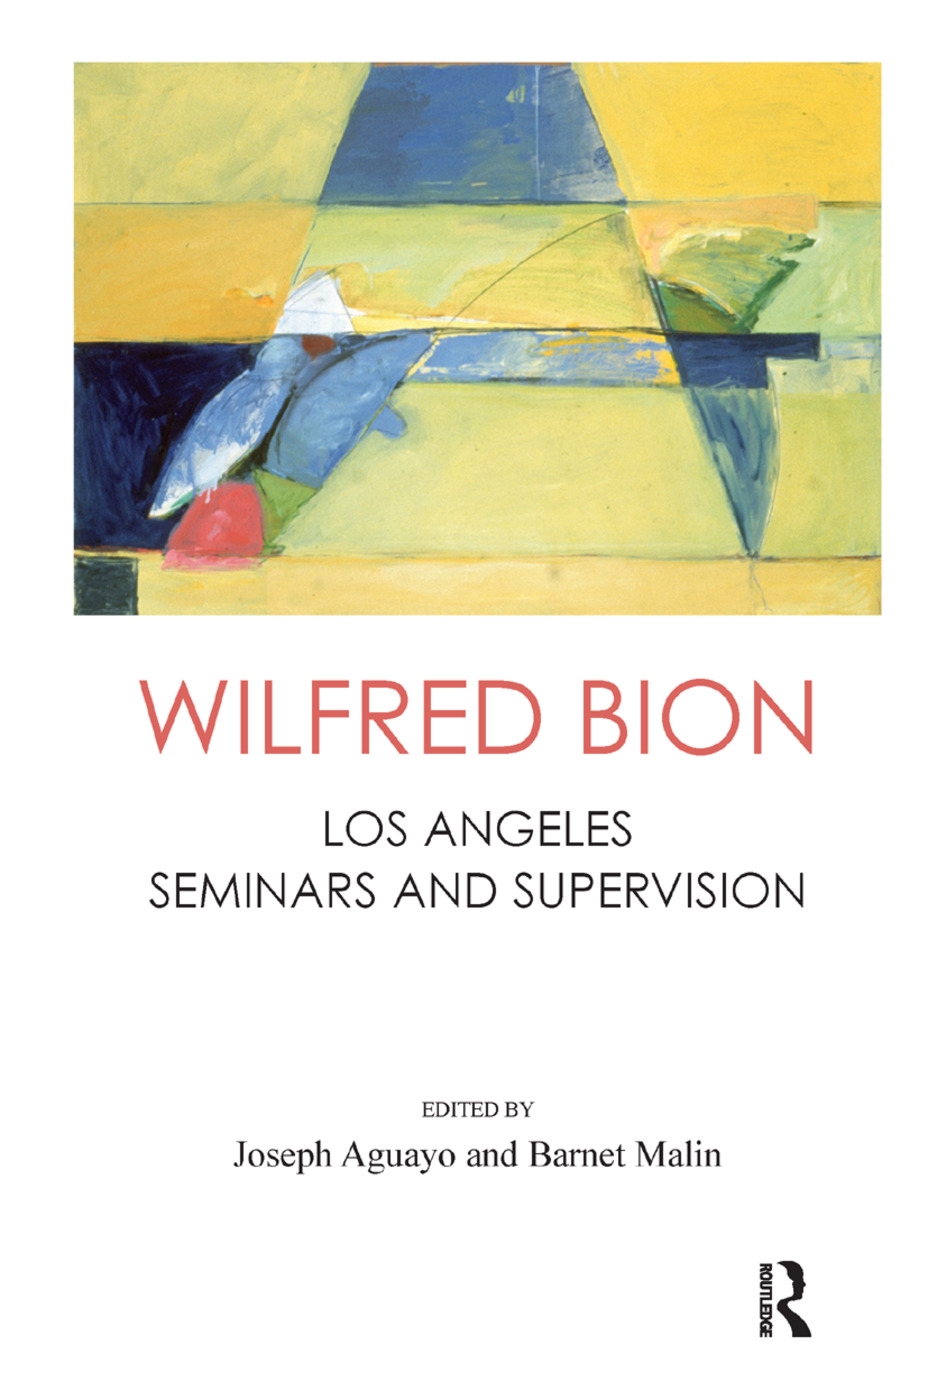 Wilfred Bion: Los Angeles Seminars and Supervision